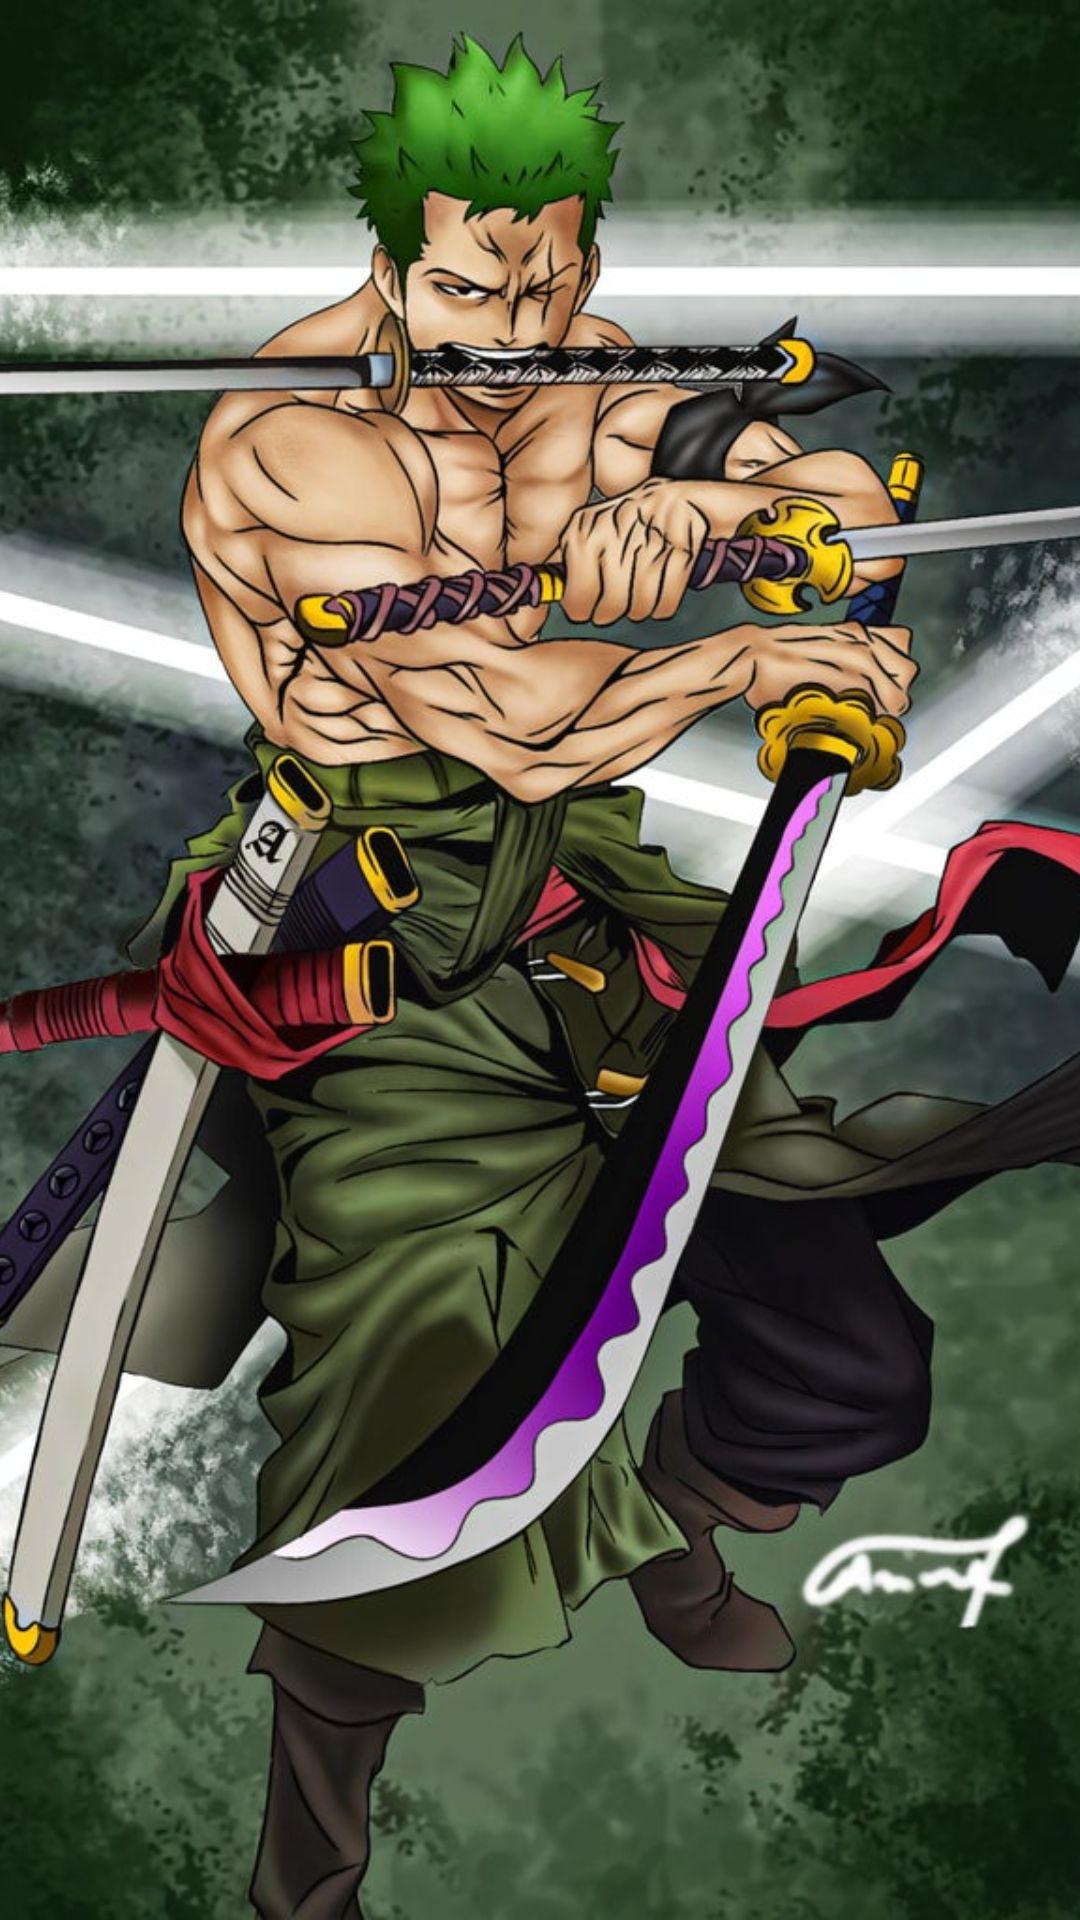 Zoro Android Wallpapers - Top Free Zoro Android Backgrounds ...